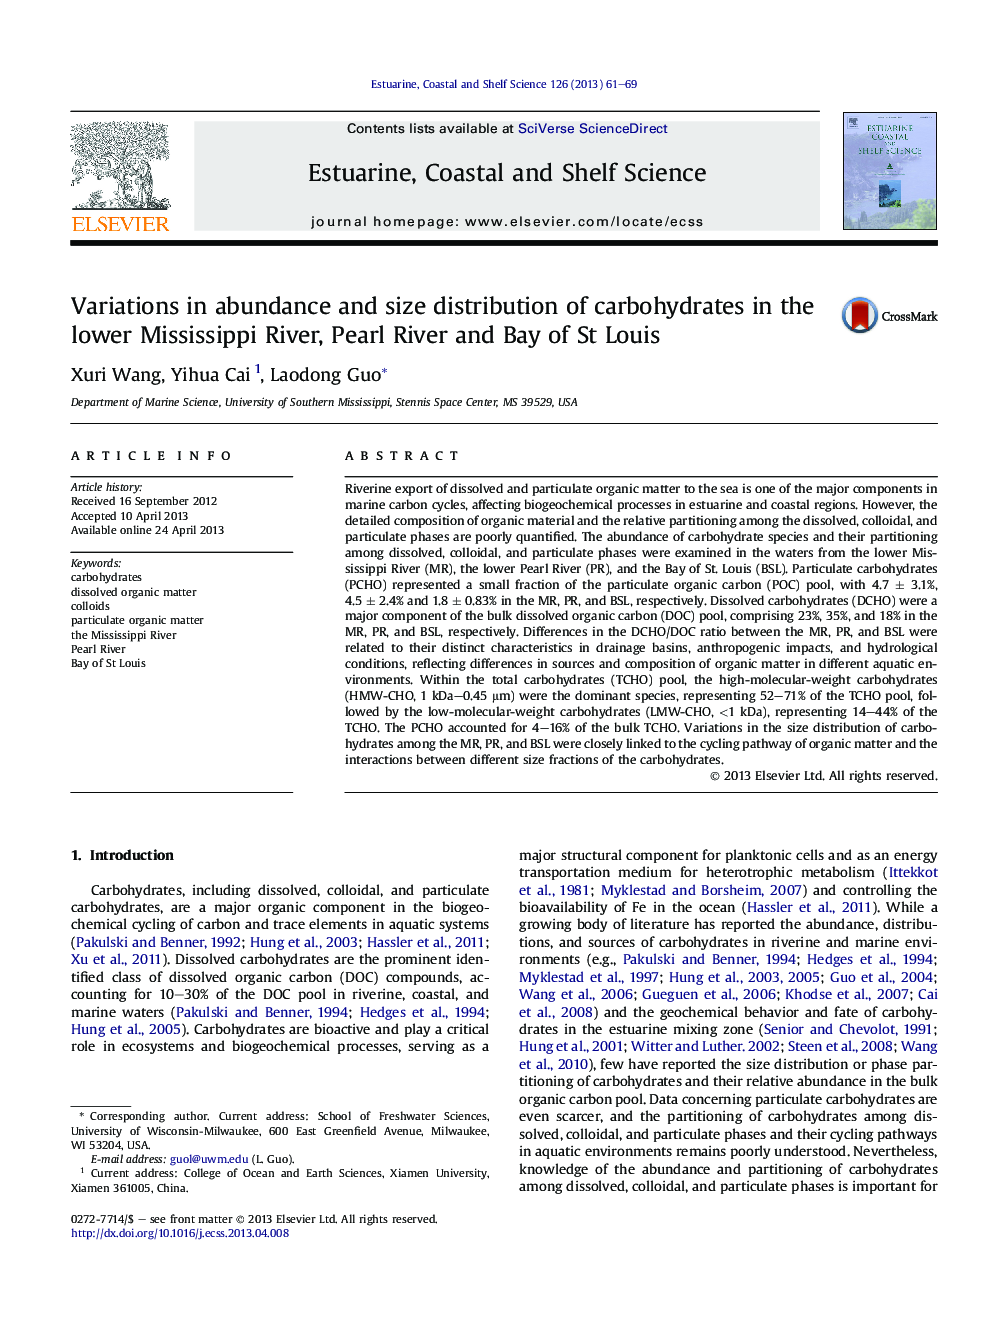 Variations in abundance and size distribution of carbohydrates in the lower Mississippi River, Pearl River and Bay of St Louis